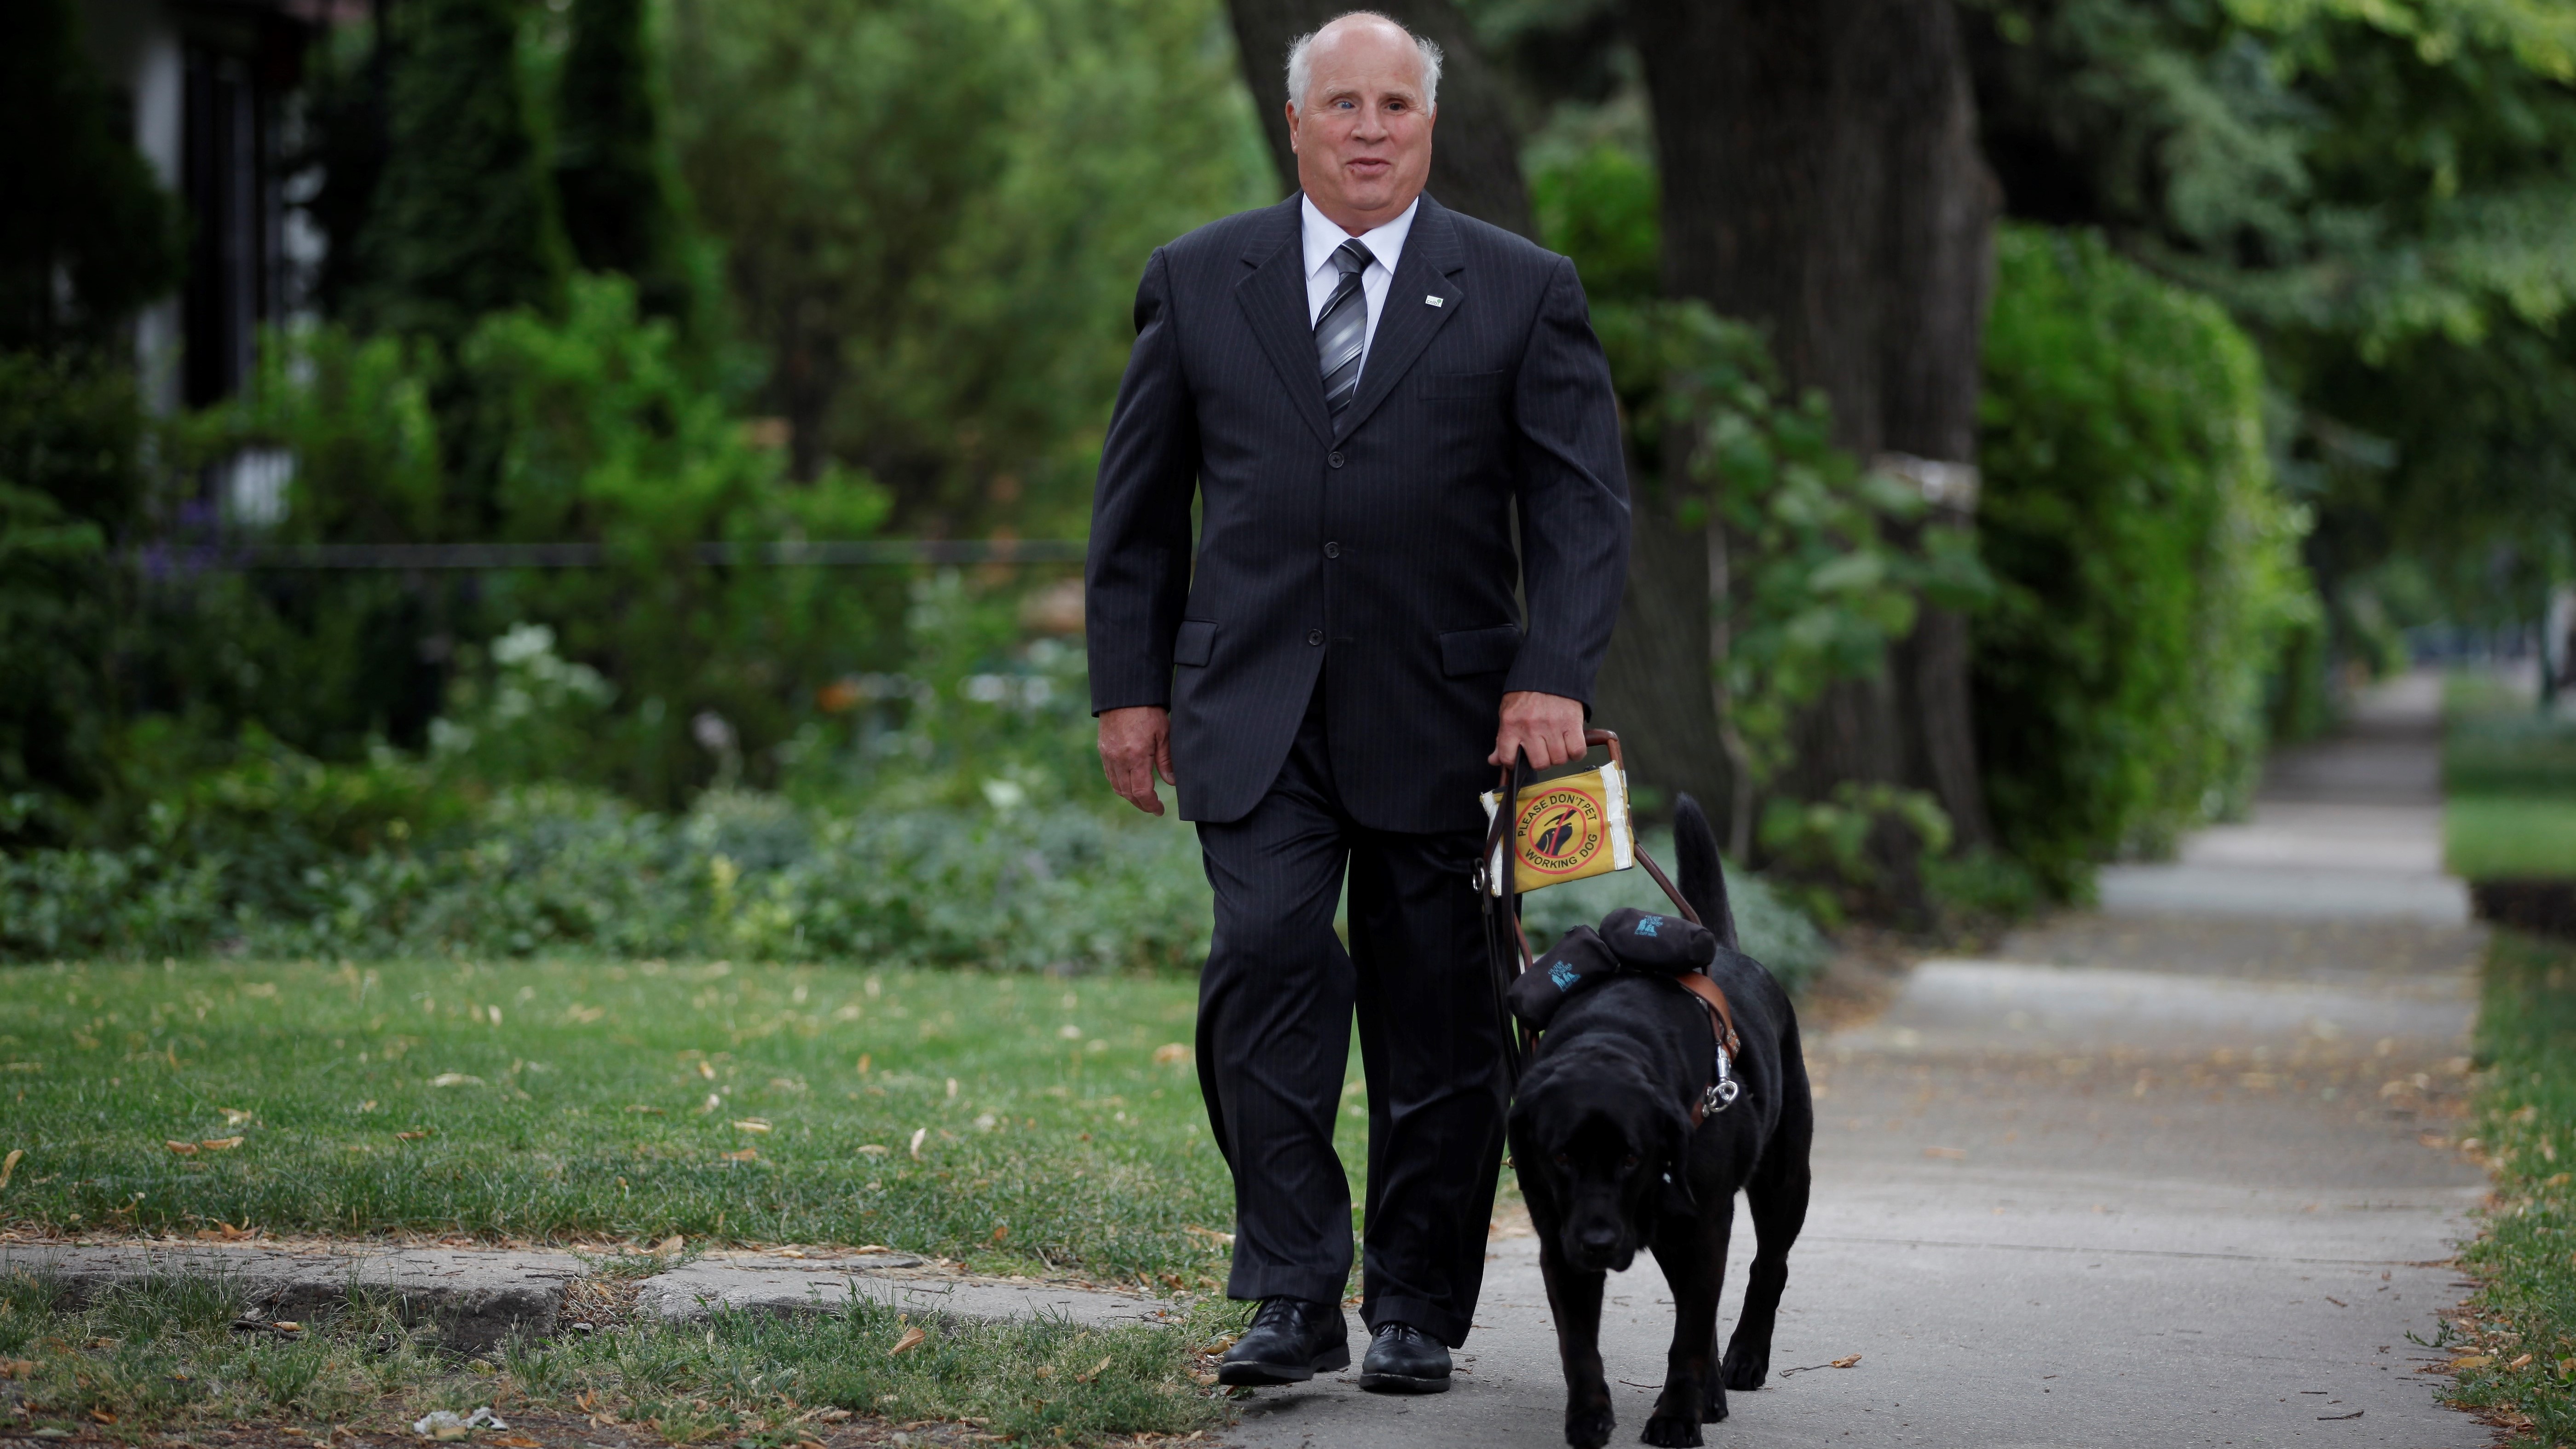 Shep Shell walks with his guide dog whilst wearing a dark suit and tie.